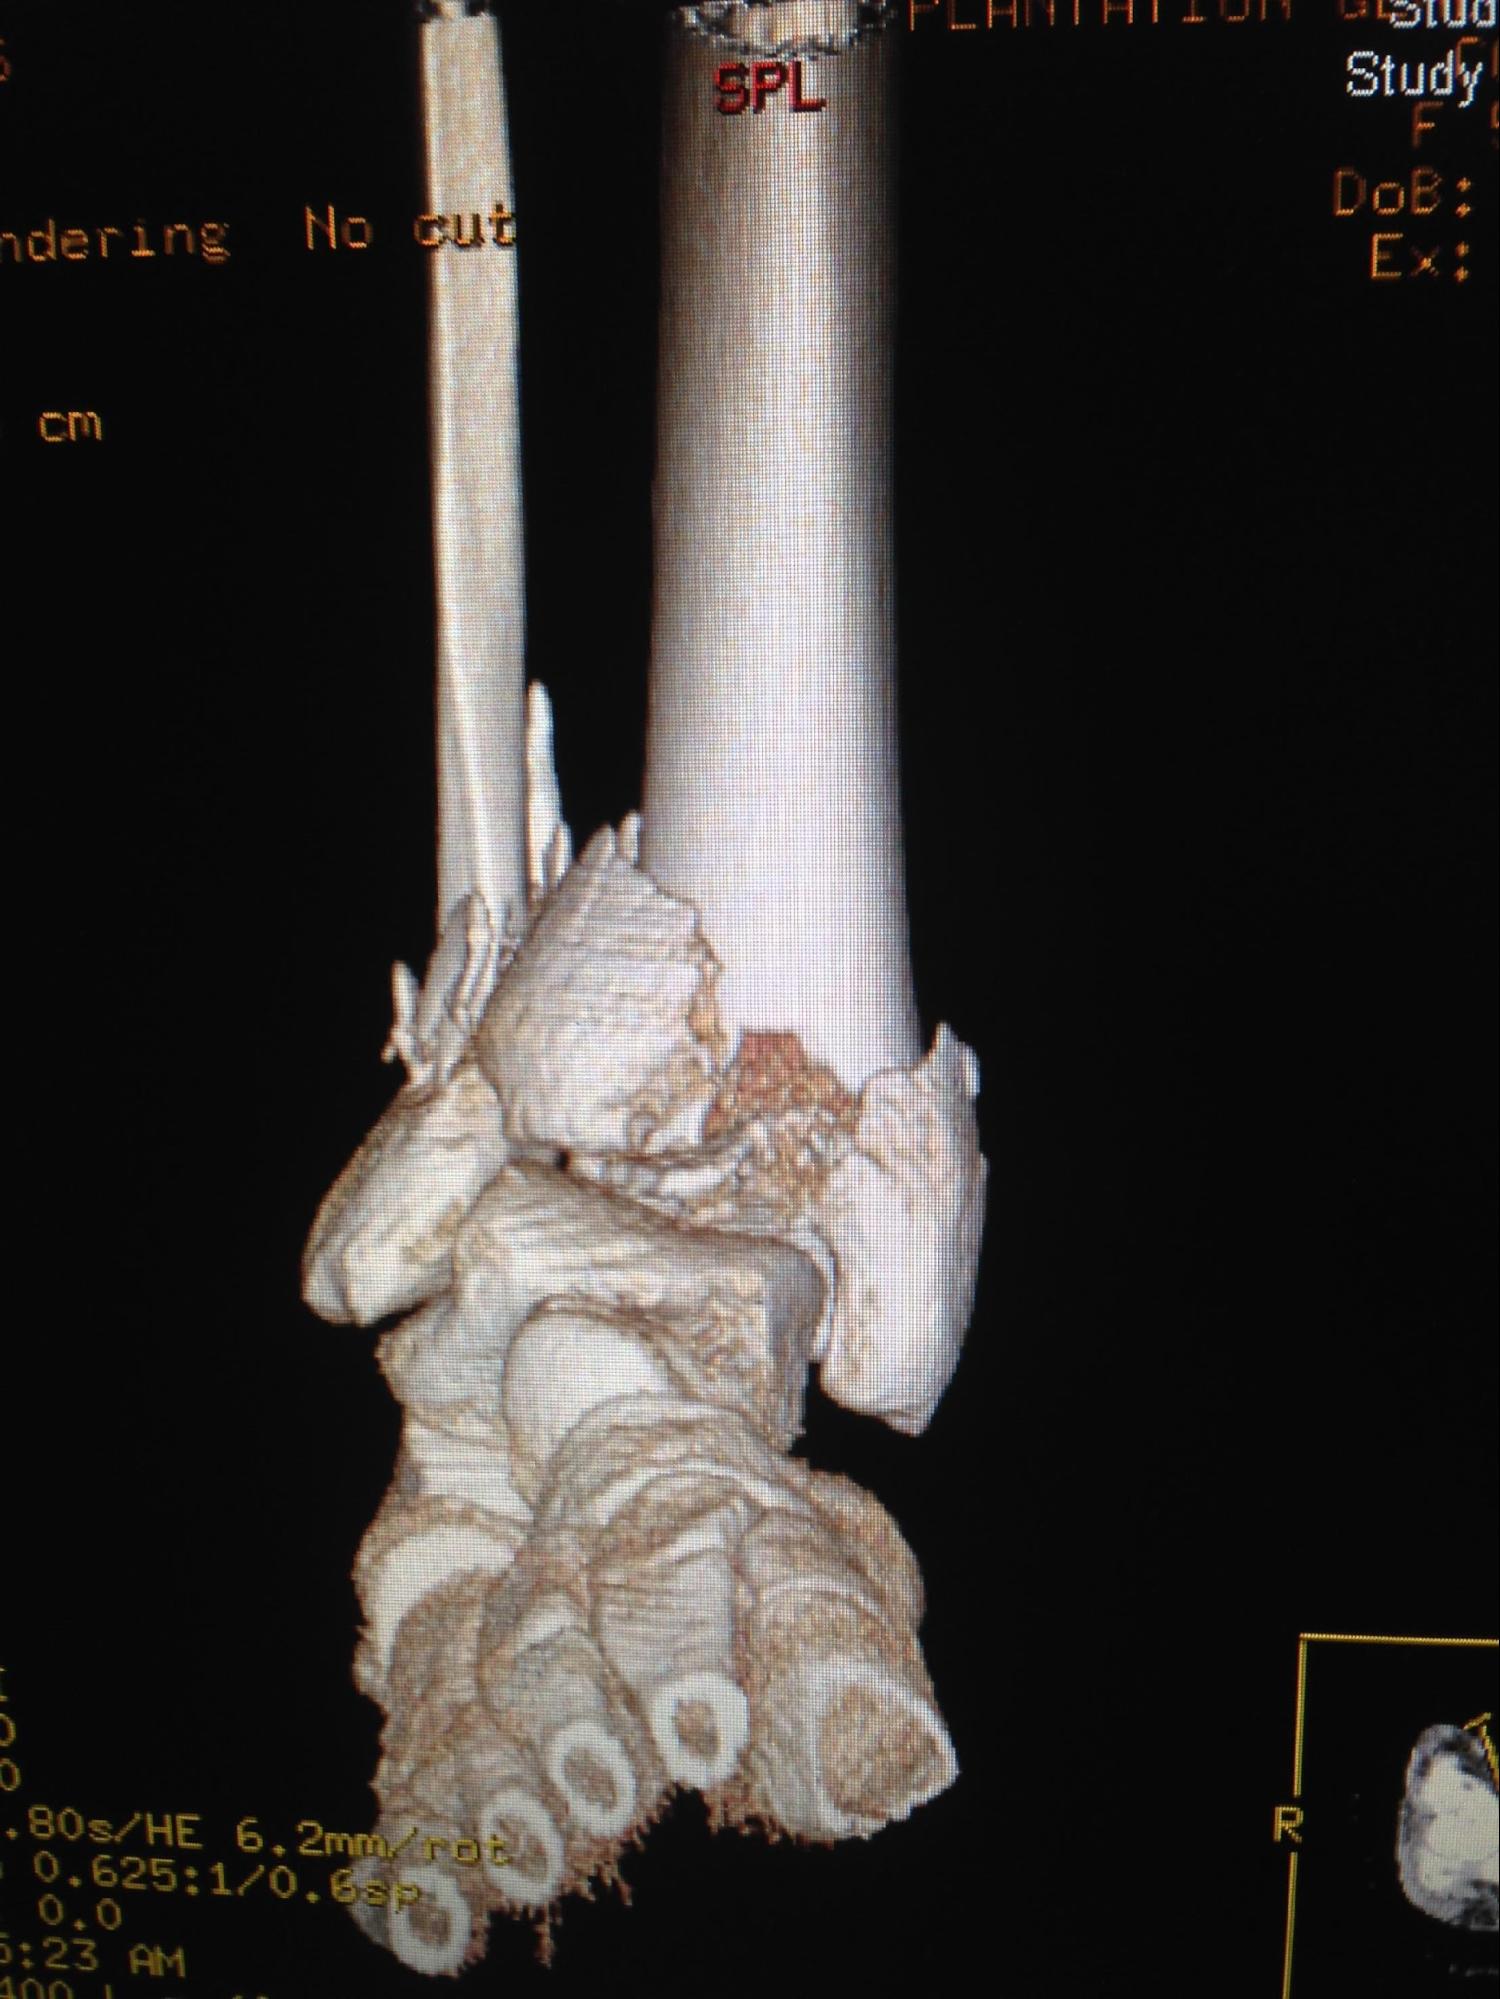 Pilon Fracture
3D CT scan of a pilon fracture. 
Note articular impaction and comminution of the tibial plafond.